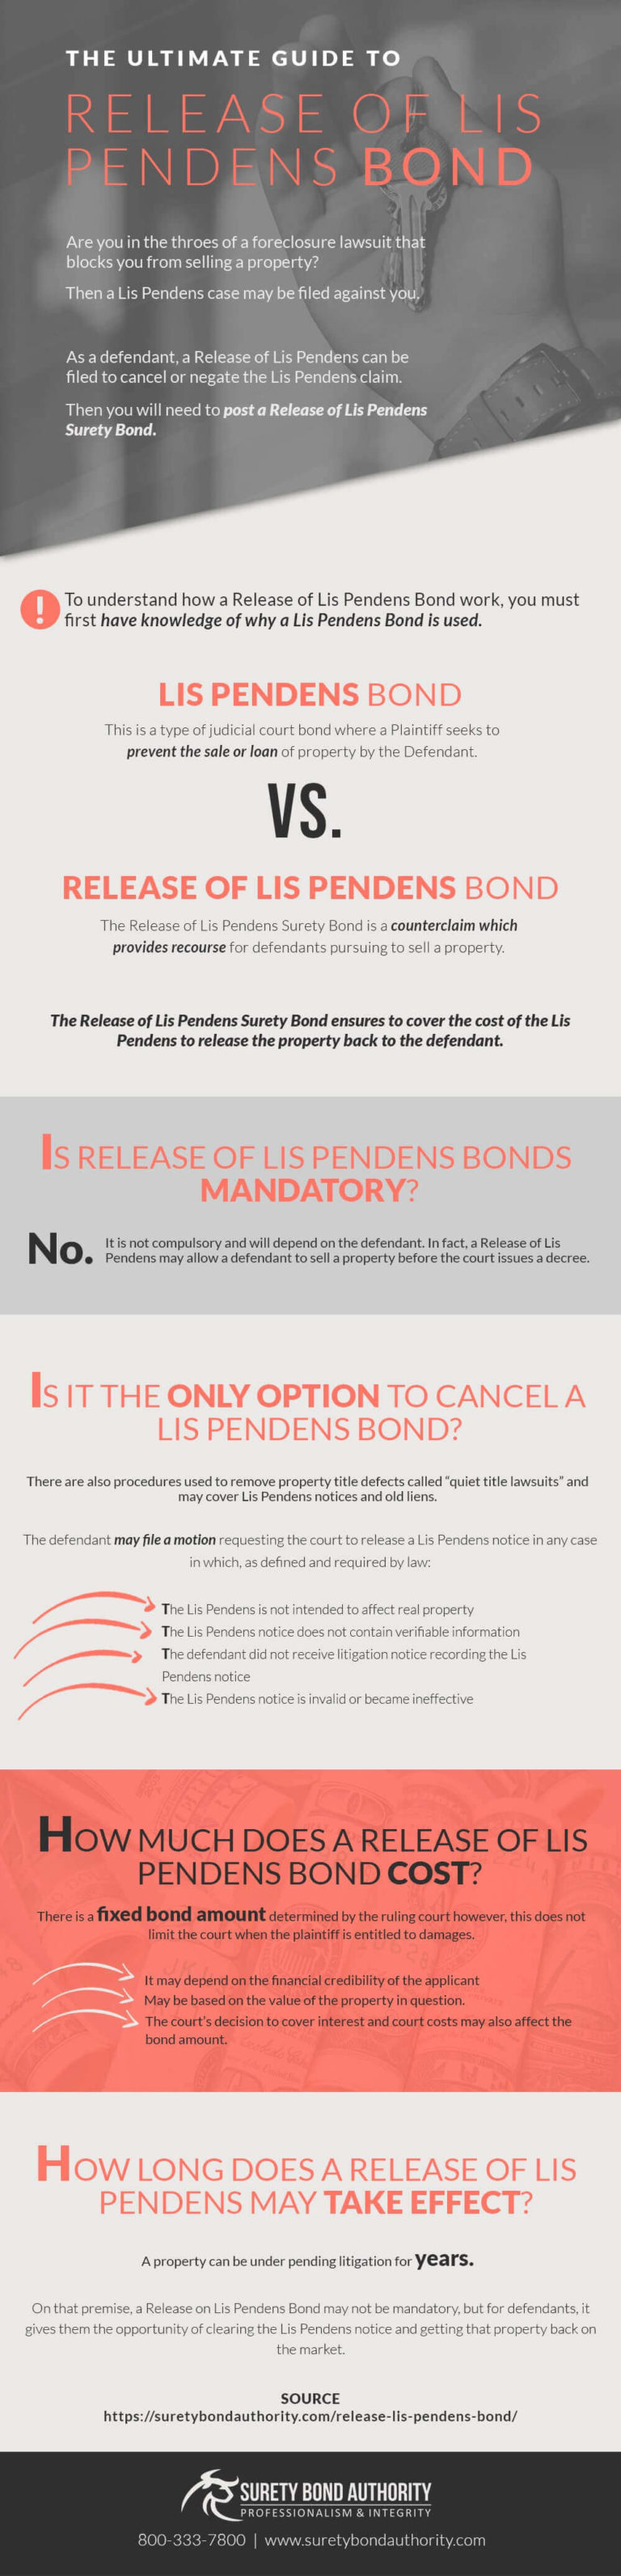 Release of Lis Pendens Bond Infographic